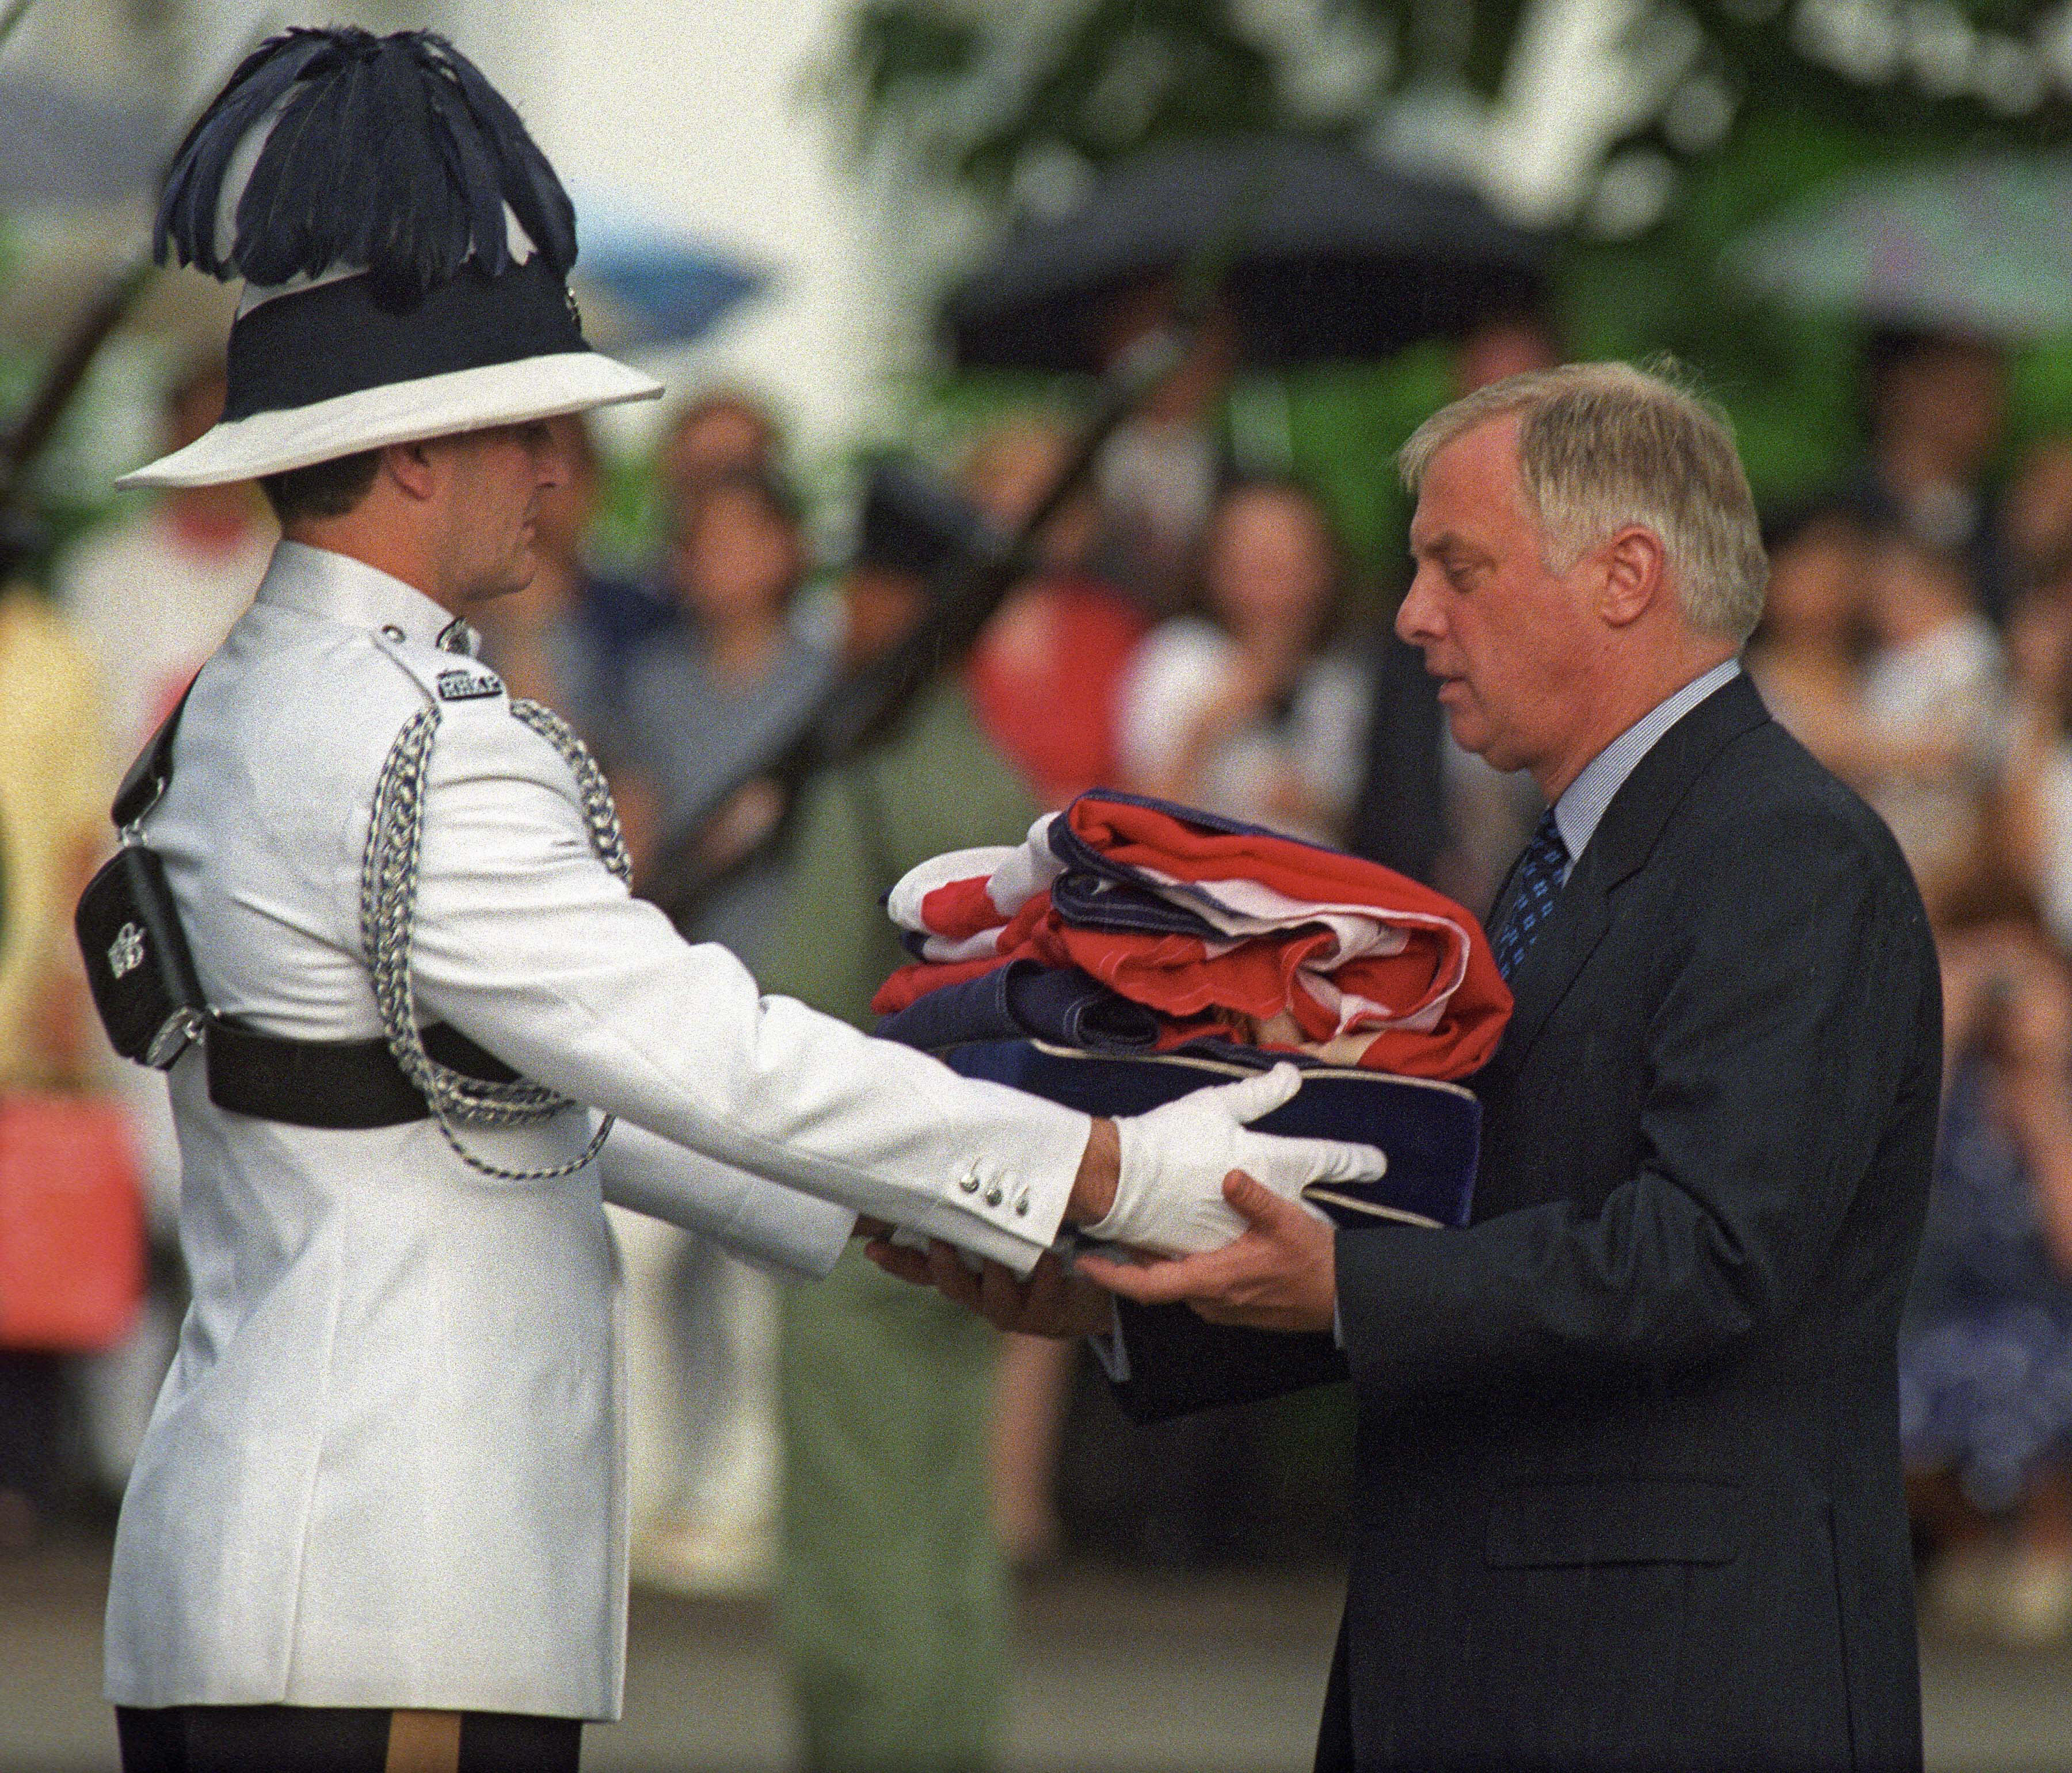 Chris Patten (R), the 28th and last governor of colonial Hong Kong, receives the Union Jack flag after is was lowered for the last time at Government House - the governor's official residence - during a farewell ceremony in Hong Kong, 30 June 1997, just hours prior to the end of some 156 years of British colonial rule as the territory returns to Chinese control. (EMMANUEL DUNAND—AFP/Getty Images)